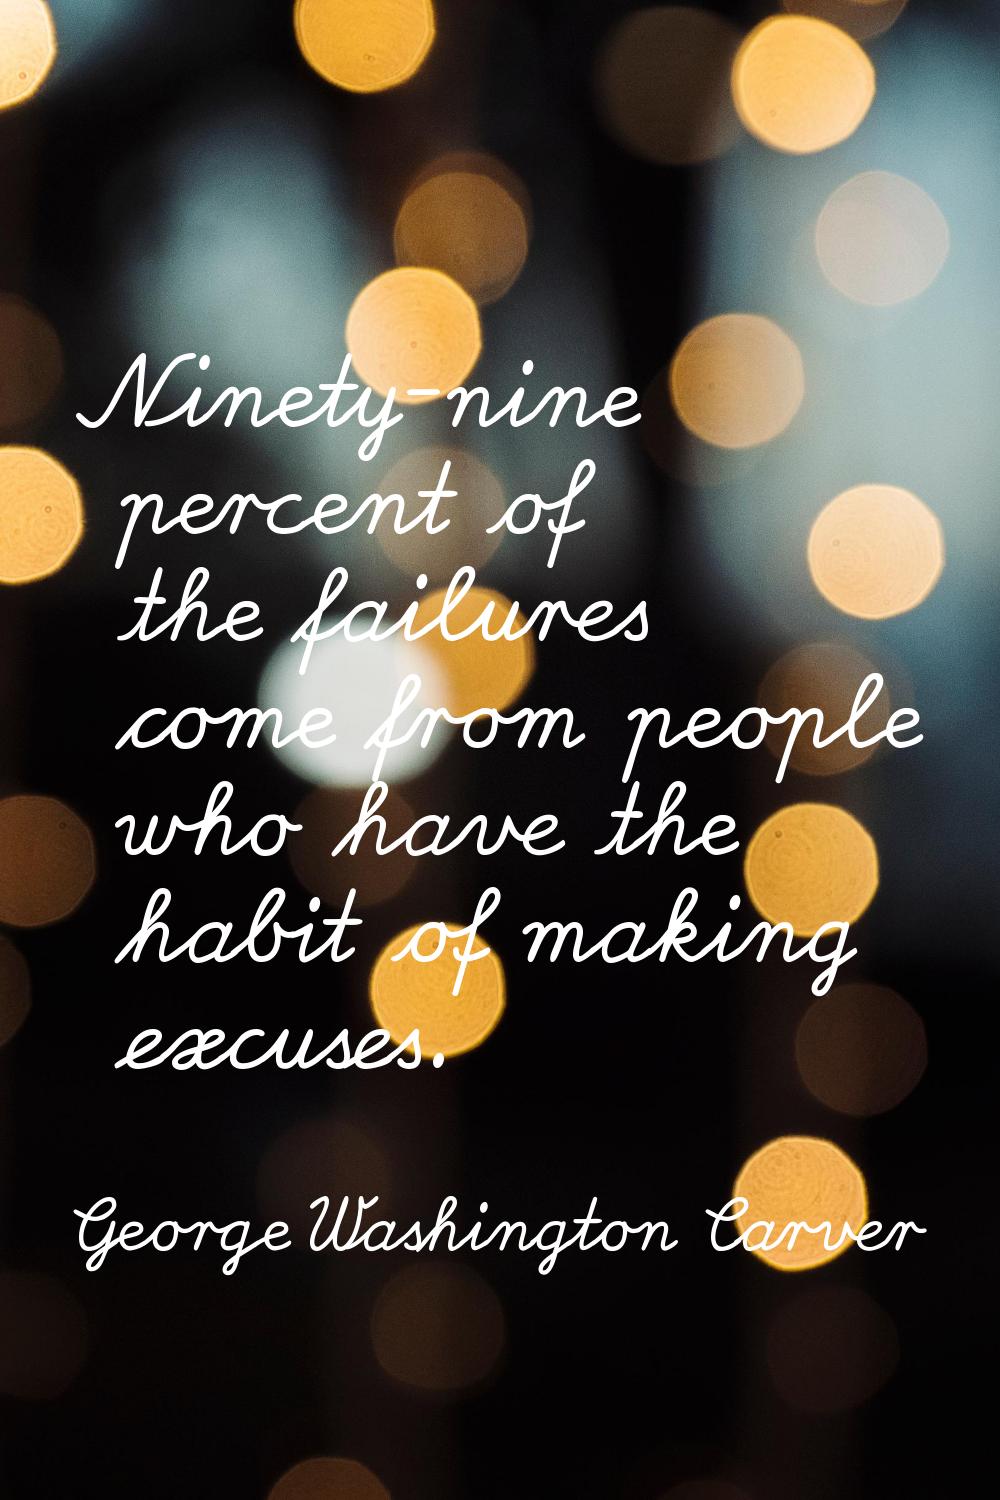 Ninety-nine percent of the failures come from people who have the habit of making excuses.